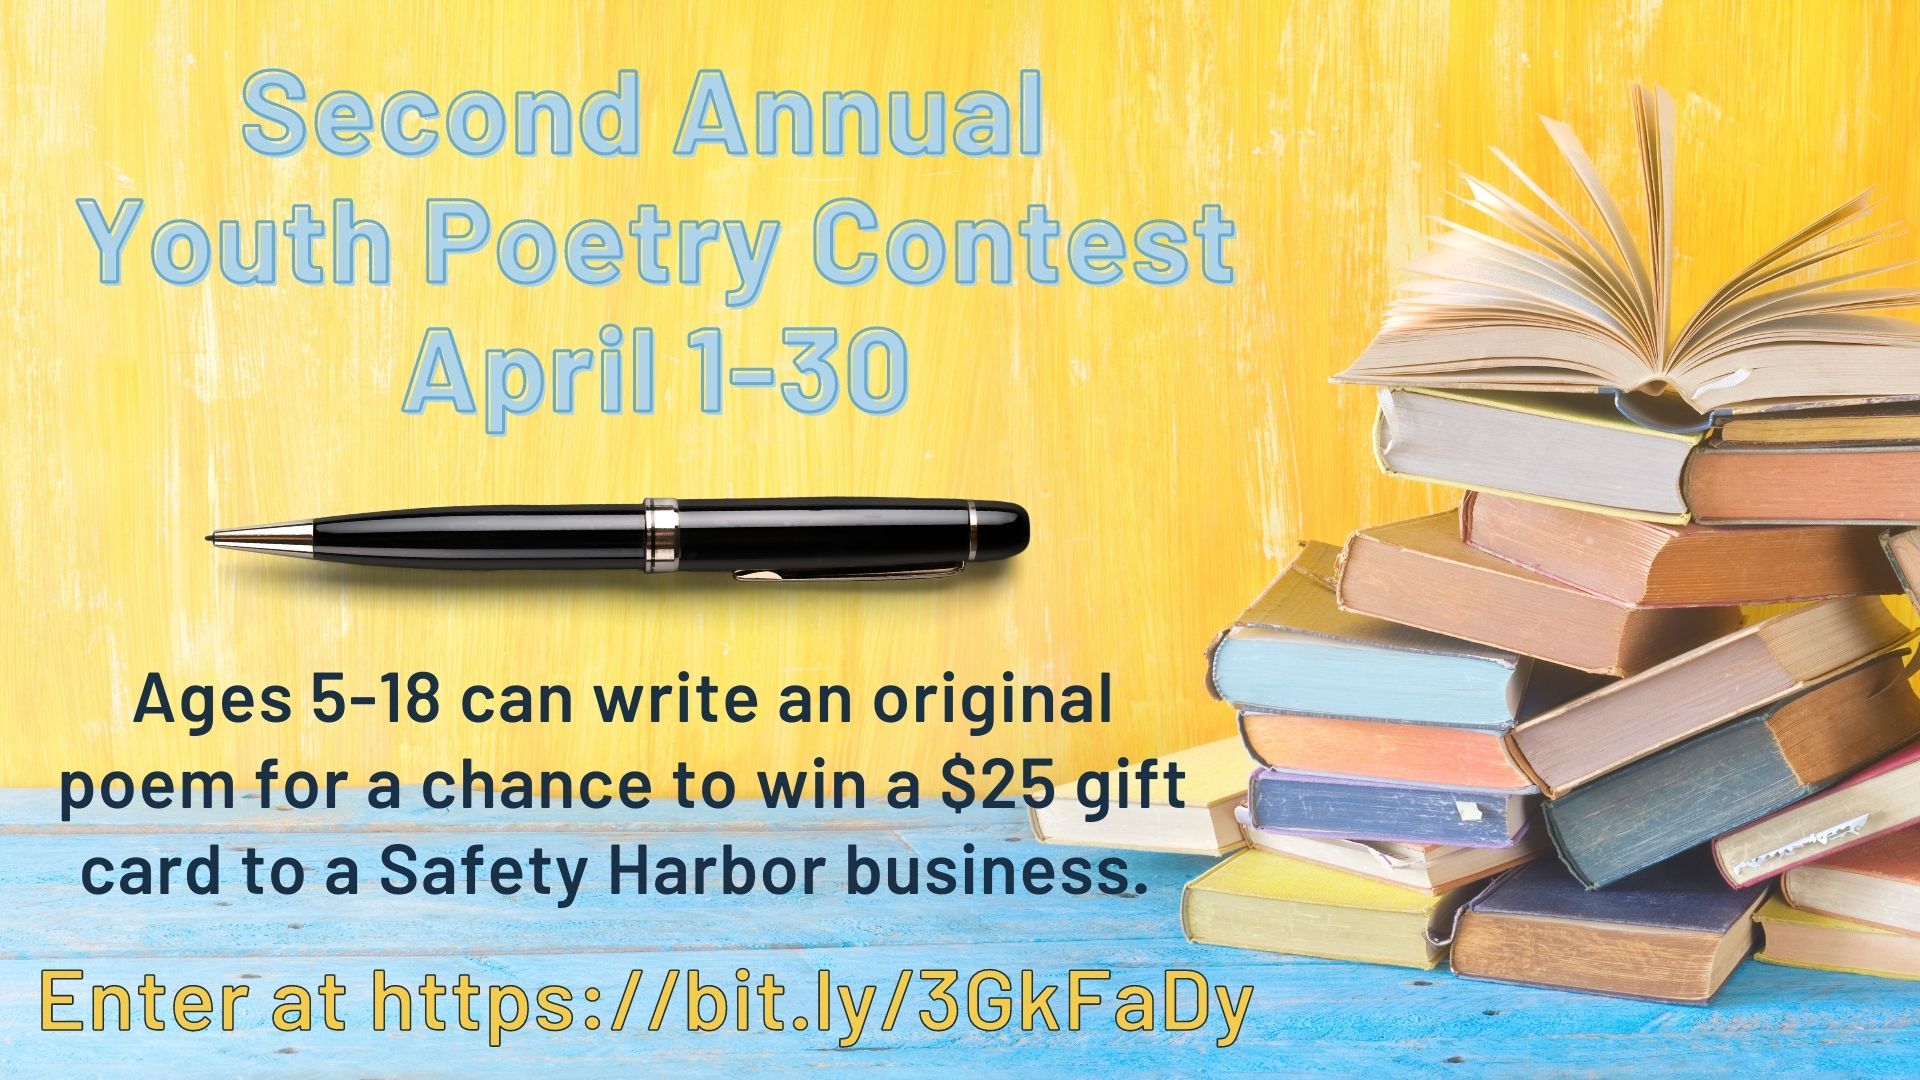 Poetry Contest webslide with details (included below), a stack of books, and a pen. 